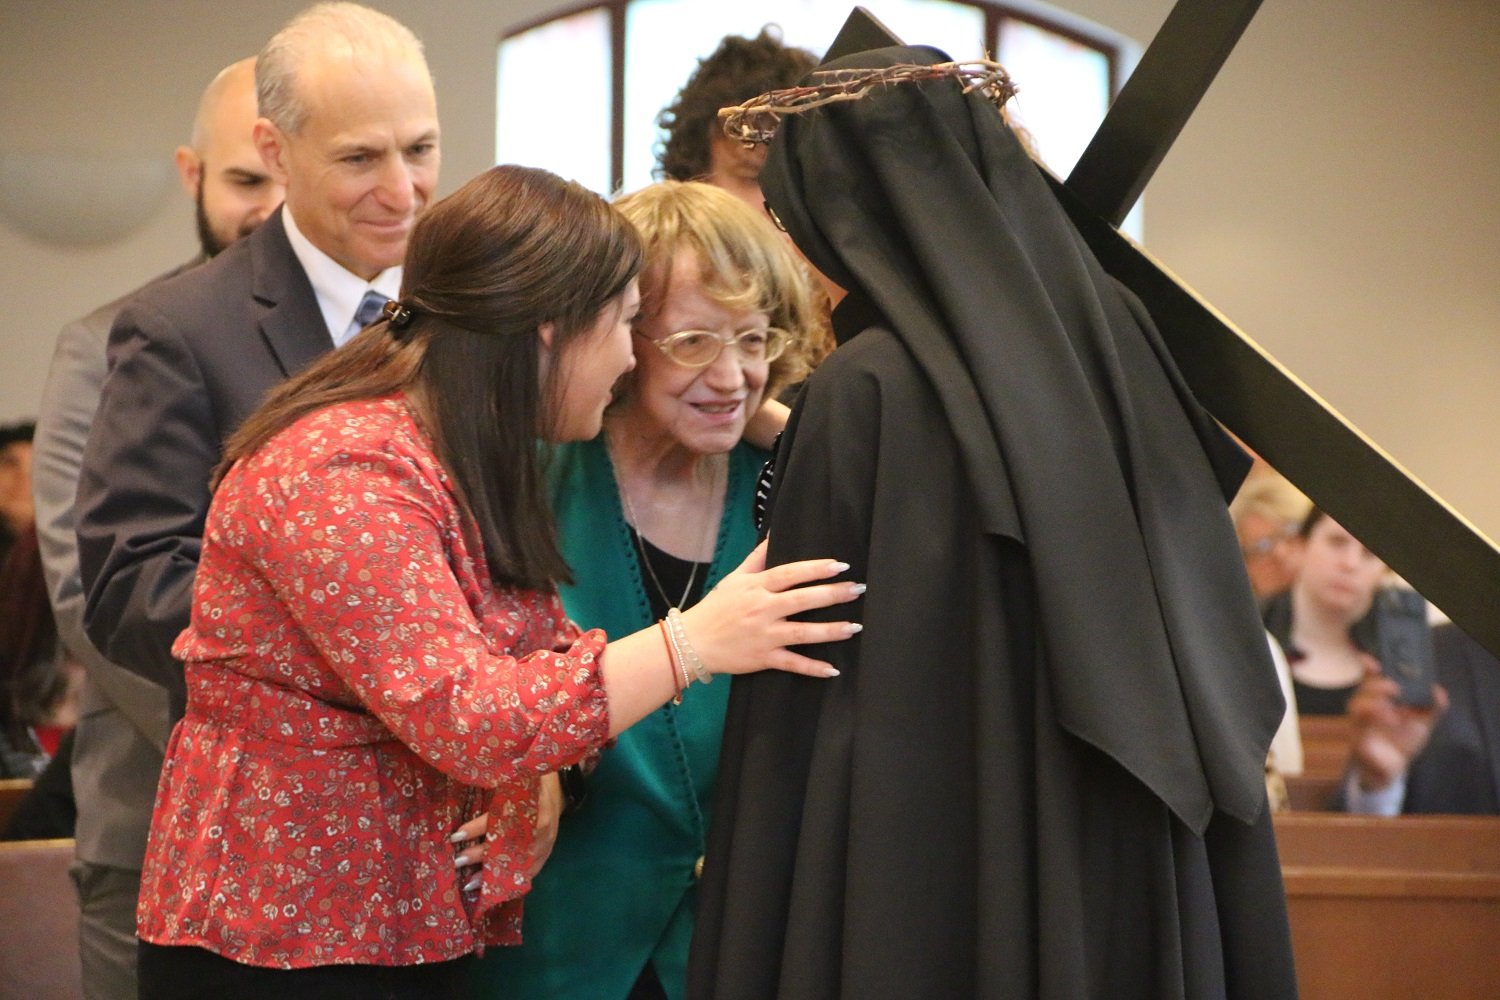  Sister’s grandmother Joan traveled to make a surprise appearance at the Profession Mass! She is accompanied here by Regina, the girlfriend of Sr. Maria Faustina’s brother Shane.   (Photo: Elizabeth Wong Barnstead, Western KY Catholic)  